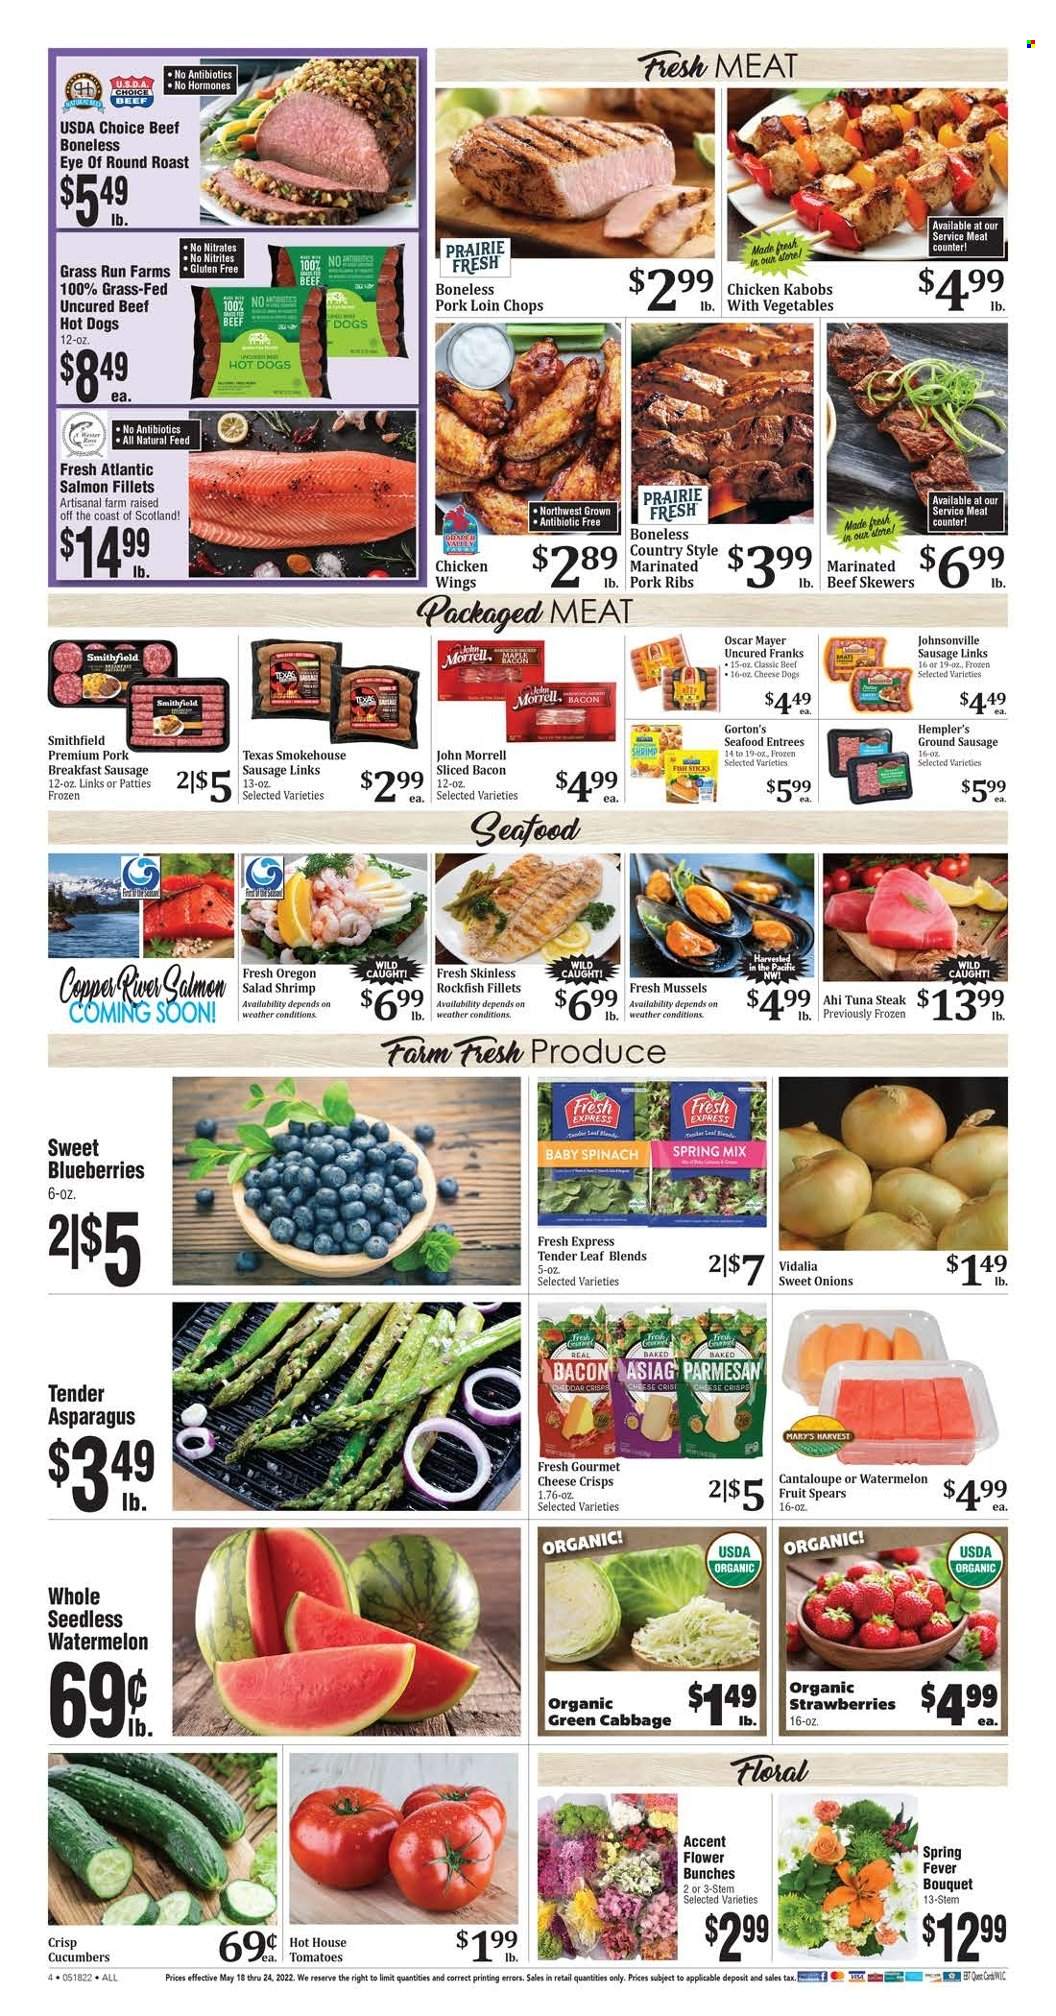 thumbnail - Rosauers Flyer - 05/18/2022 - 05/24/2022 - Sales products - asparagus, cabbage, cantaloupe, cucumber, spinach, tomatoes, salad, blueberries, strawberries, watermelon, mussels, rockfish, salmon, salmon fillet, tuna, seafood, shrimps, Gorton's, hot dog, bacon, Johnsonville, Oscar Mayer, sausage, parmesan, cheese, tuna steak, beef meat, steak, eye of round, round roast, pork chops, pork loin, pork meat, pork ribs, bunches, bouquet. Page 5.